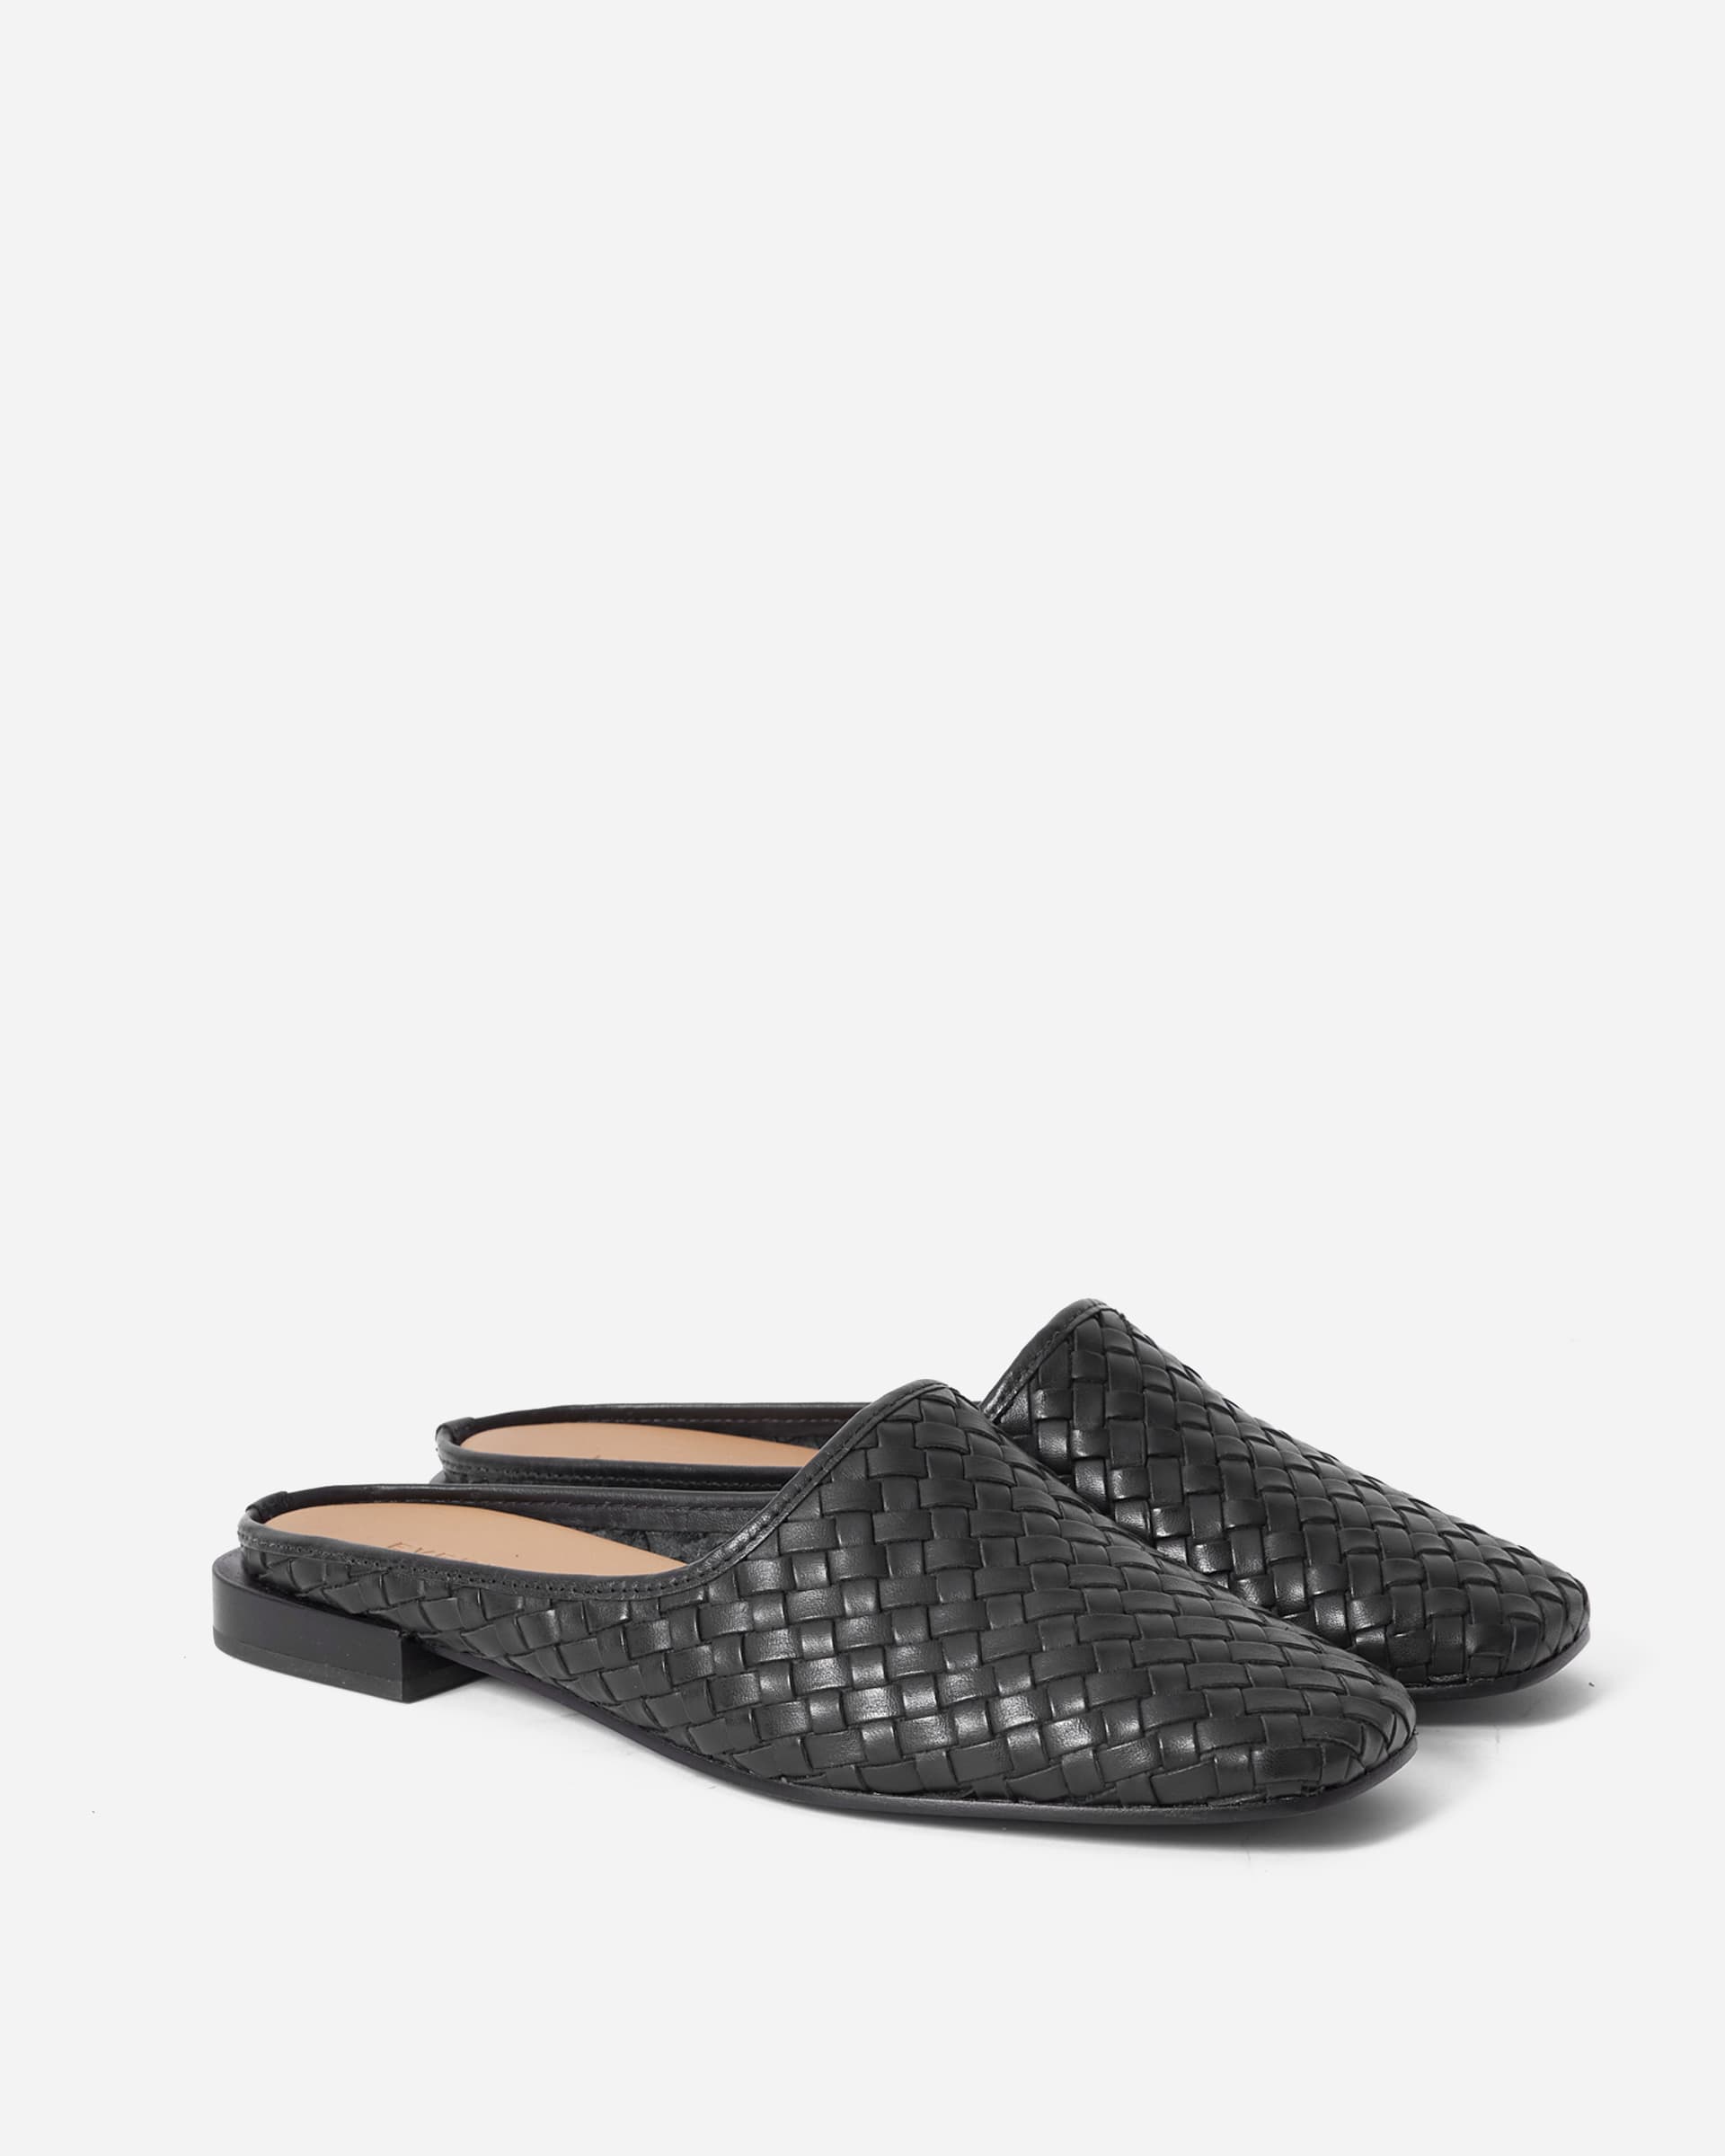 The Woven Leather Mule Black Woven – Everlane